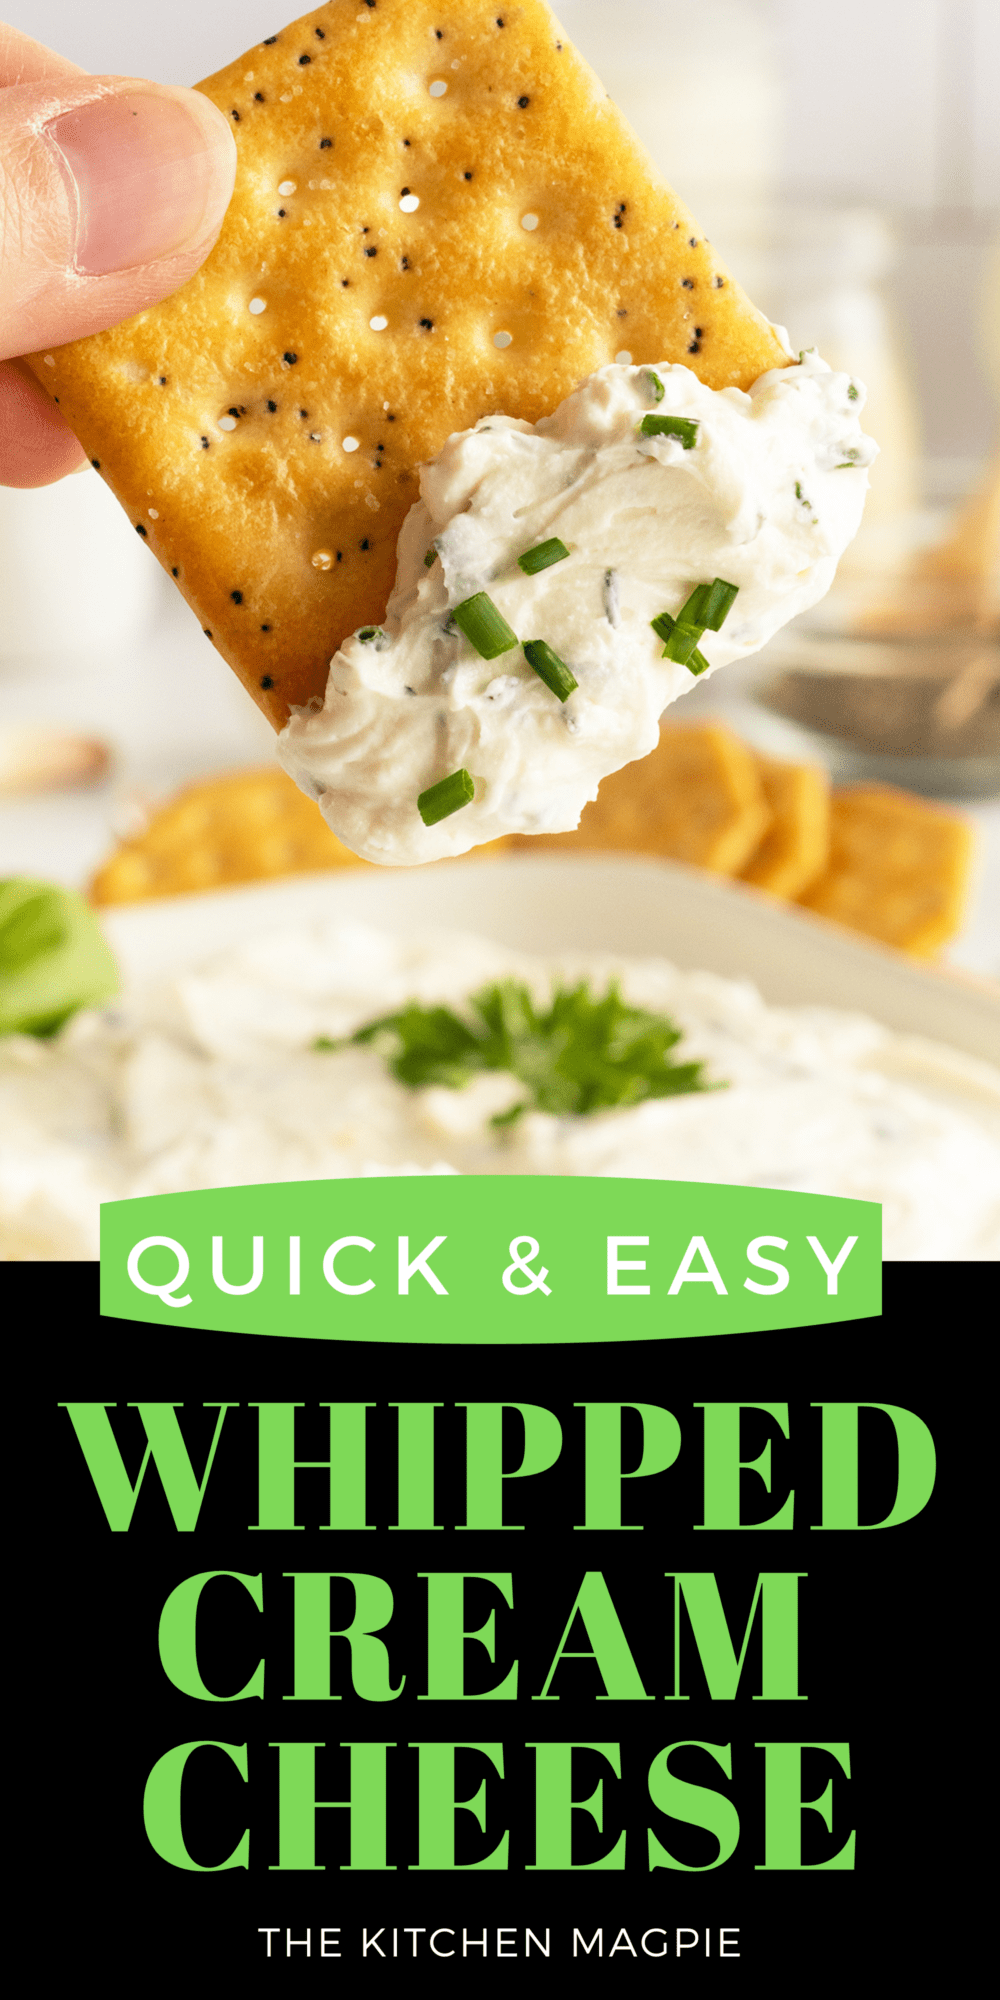 This light and fluffy whipped cream cheese just makes everything taste so much better!